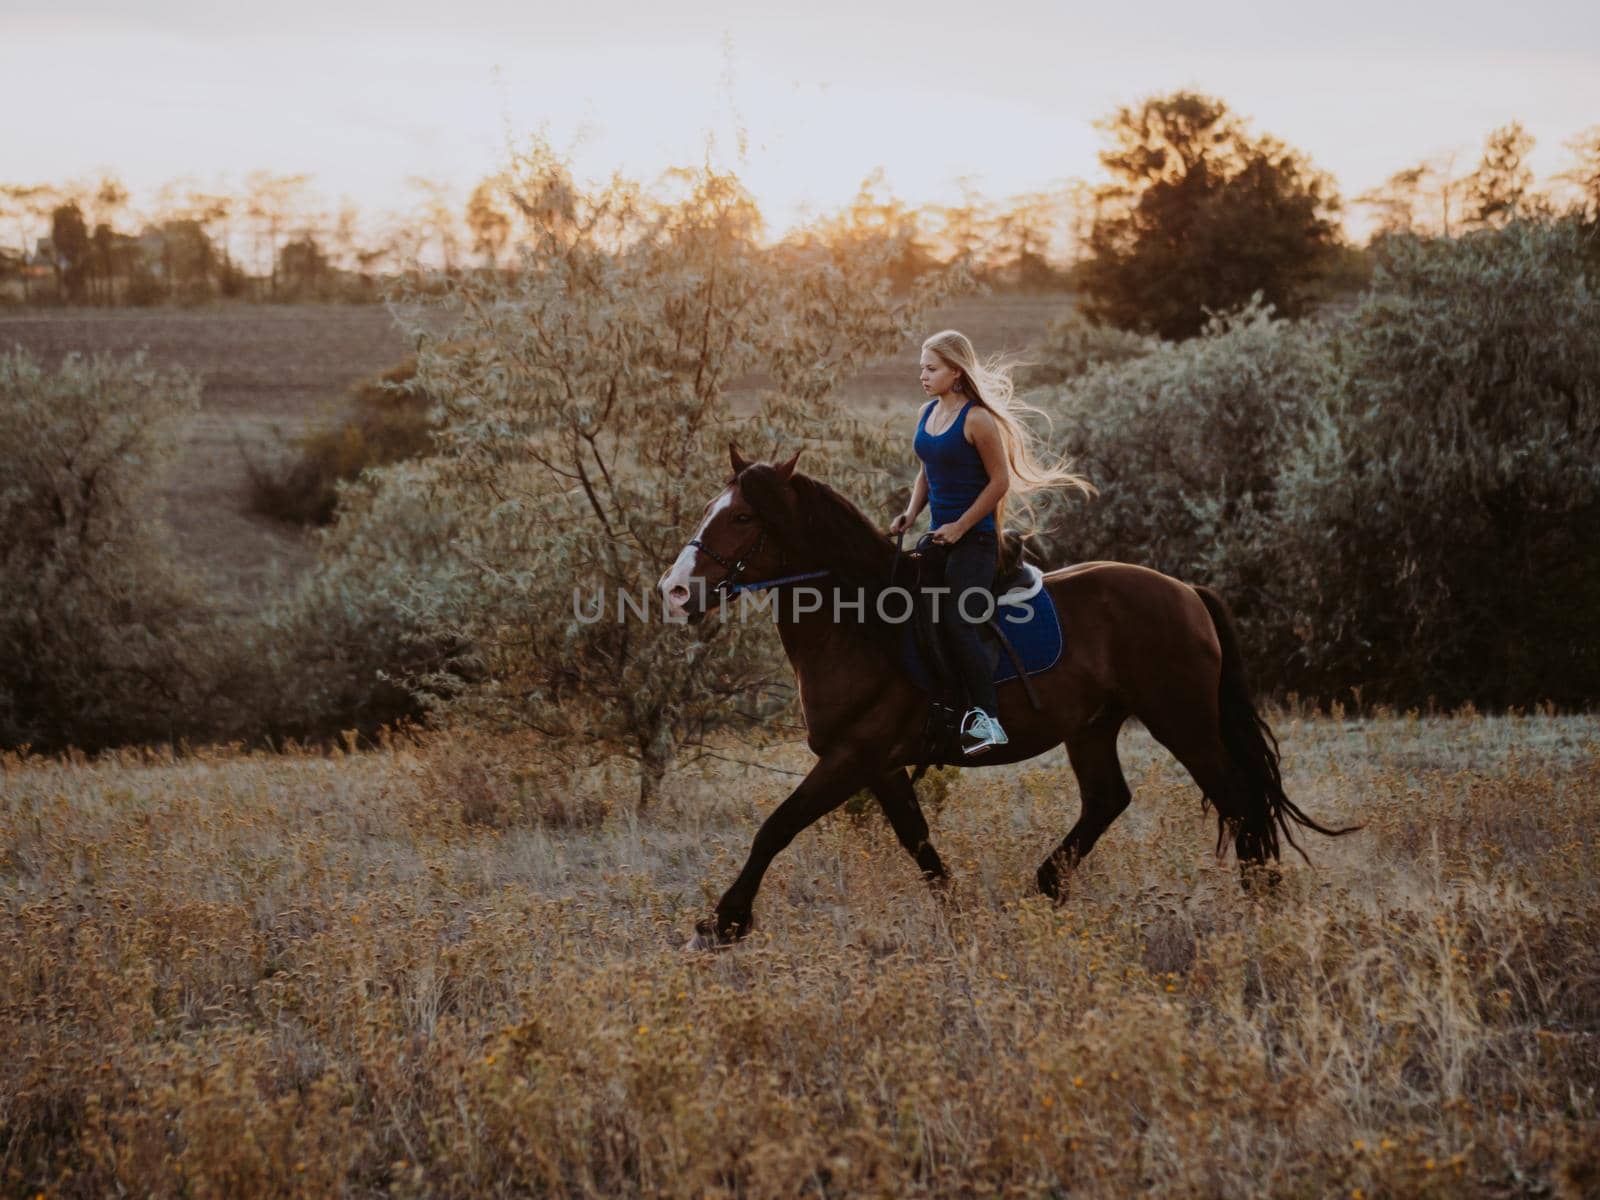 Pretty horsewoman riding dark horse on field in fall. Concept of farm animals, training, horse racing, nature. High quality photo